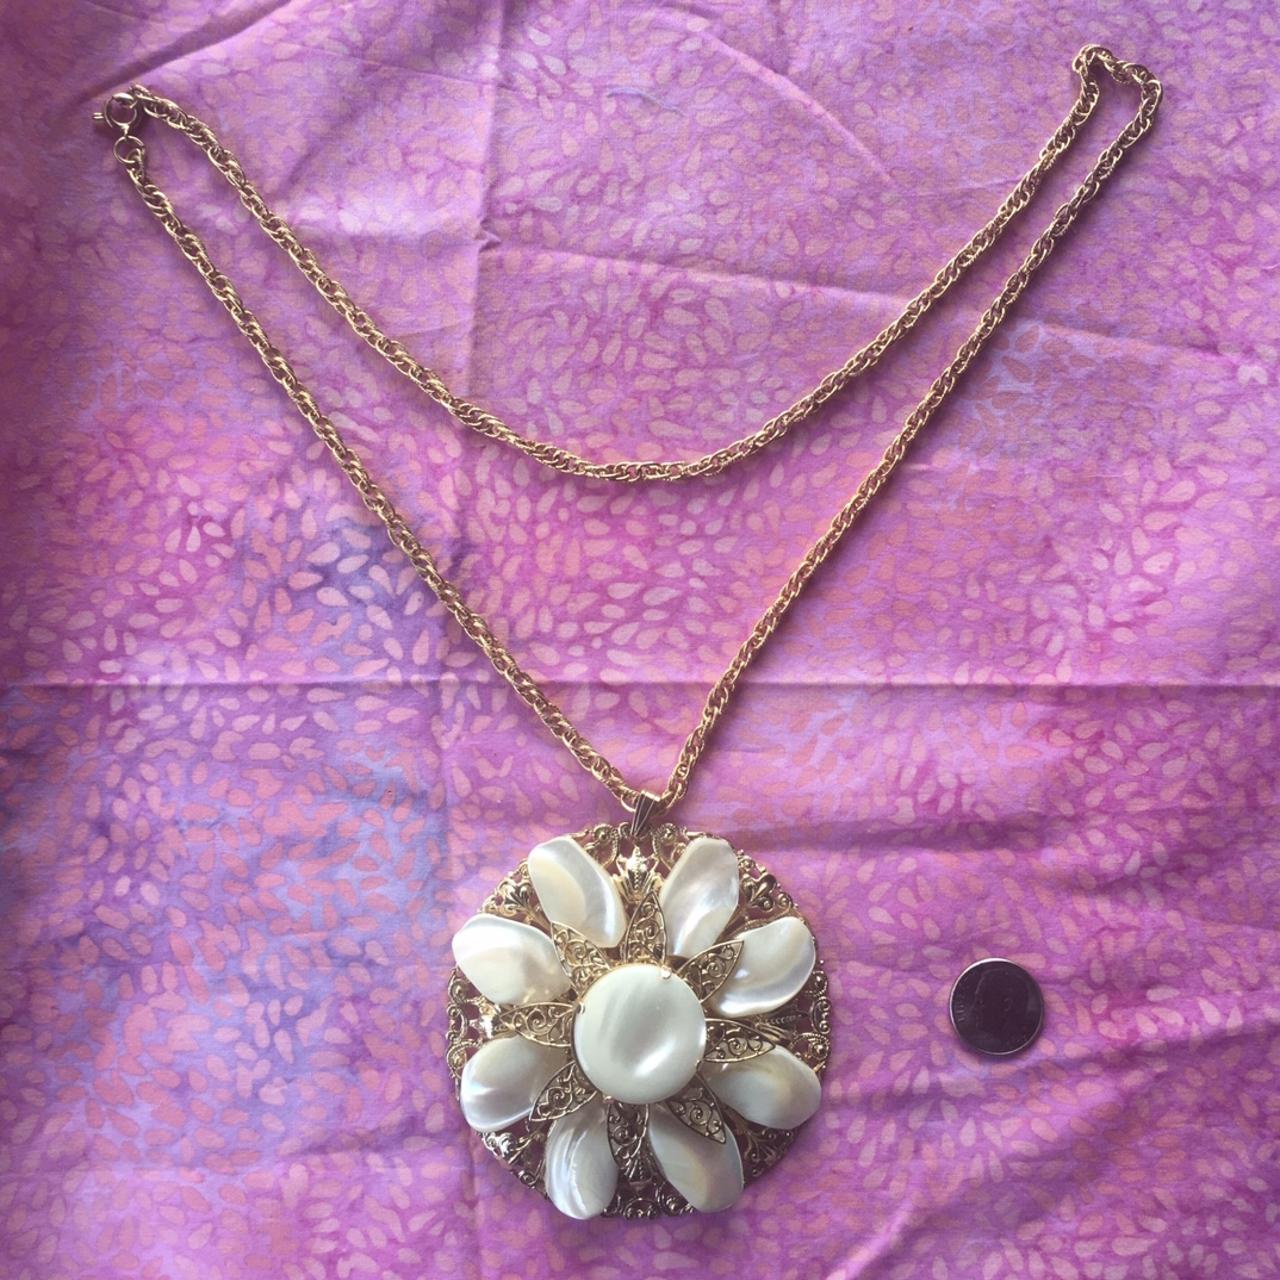 Mother of Pearl necklace|gift for her|statement piece|handmade|one of a kind|boho